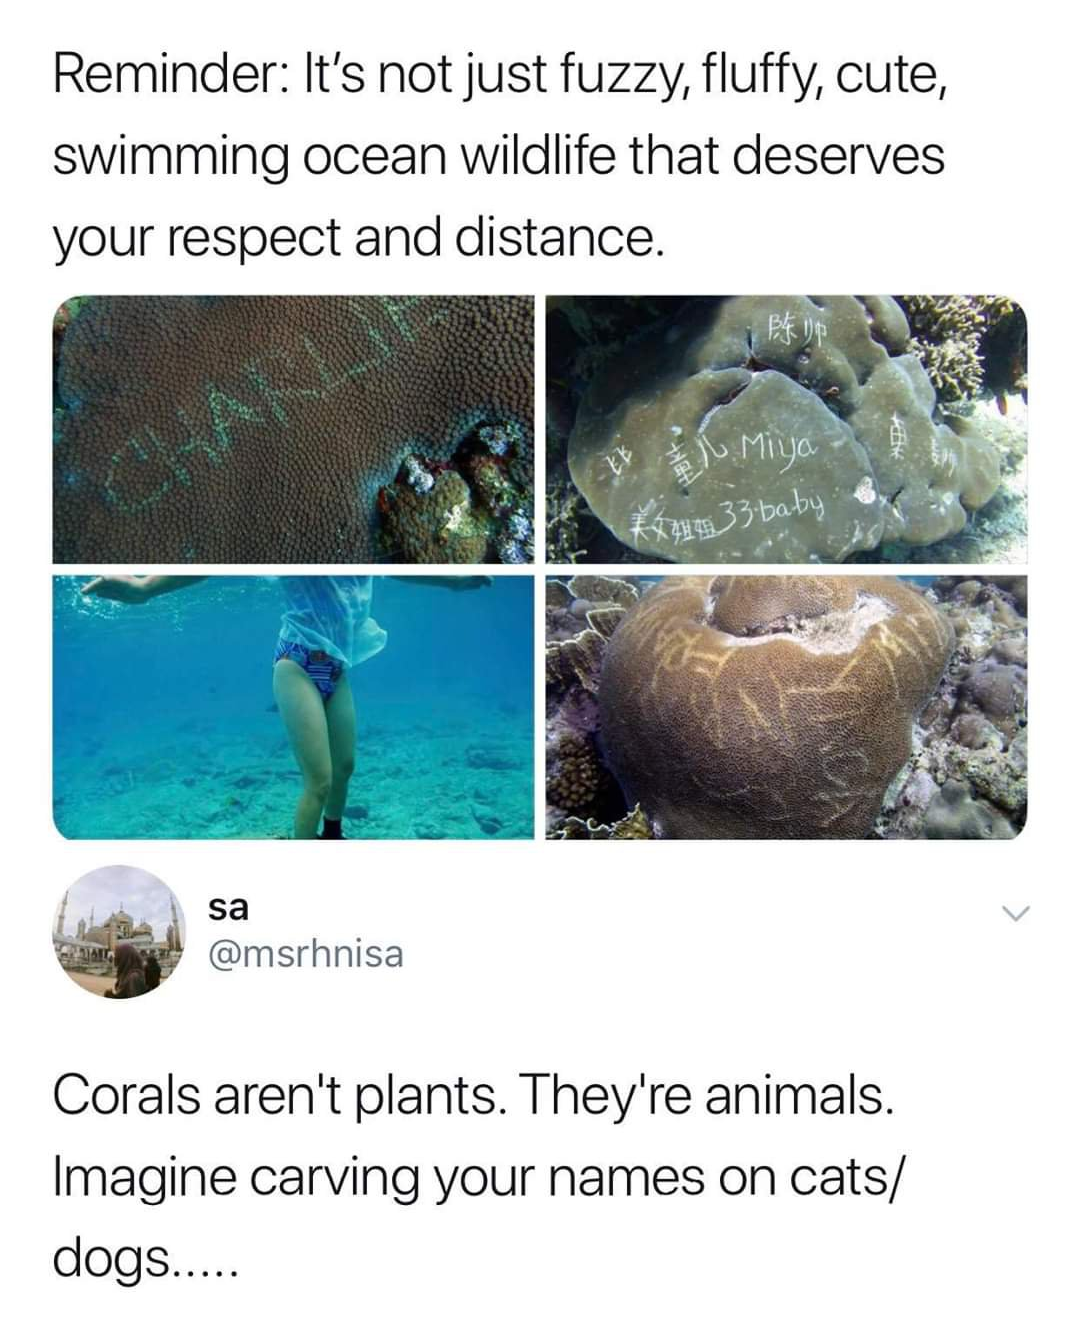 name carving in coral reefs - Reminder It's not just fuzzy, fluffy, cute, swimming ocean wildlife that deserves your respect and distance. Mo 1033 baby sa Corals aren't plants. They're animals. Imagine carving your names on cats dogs.....